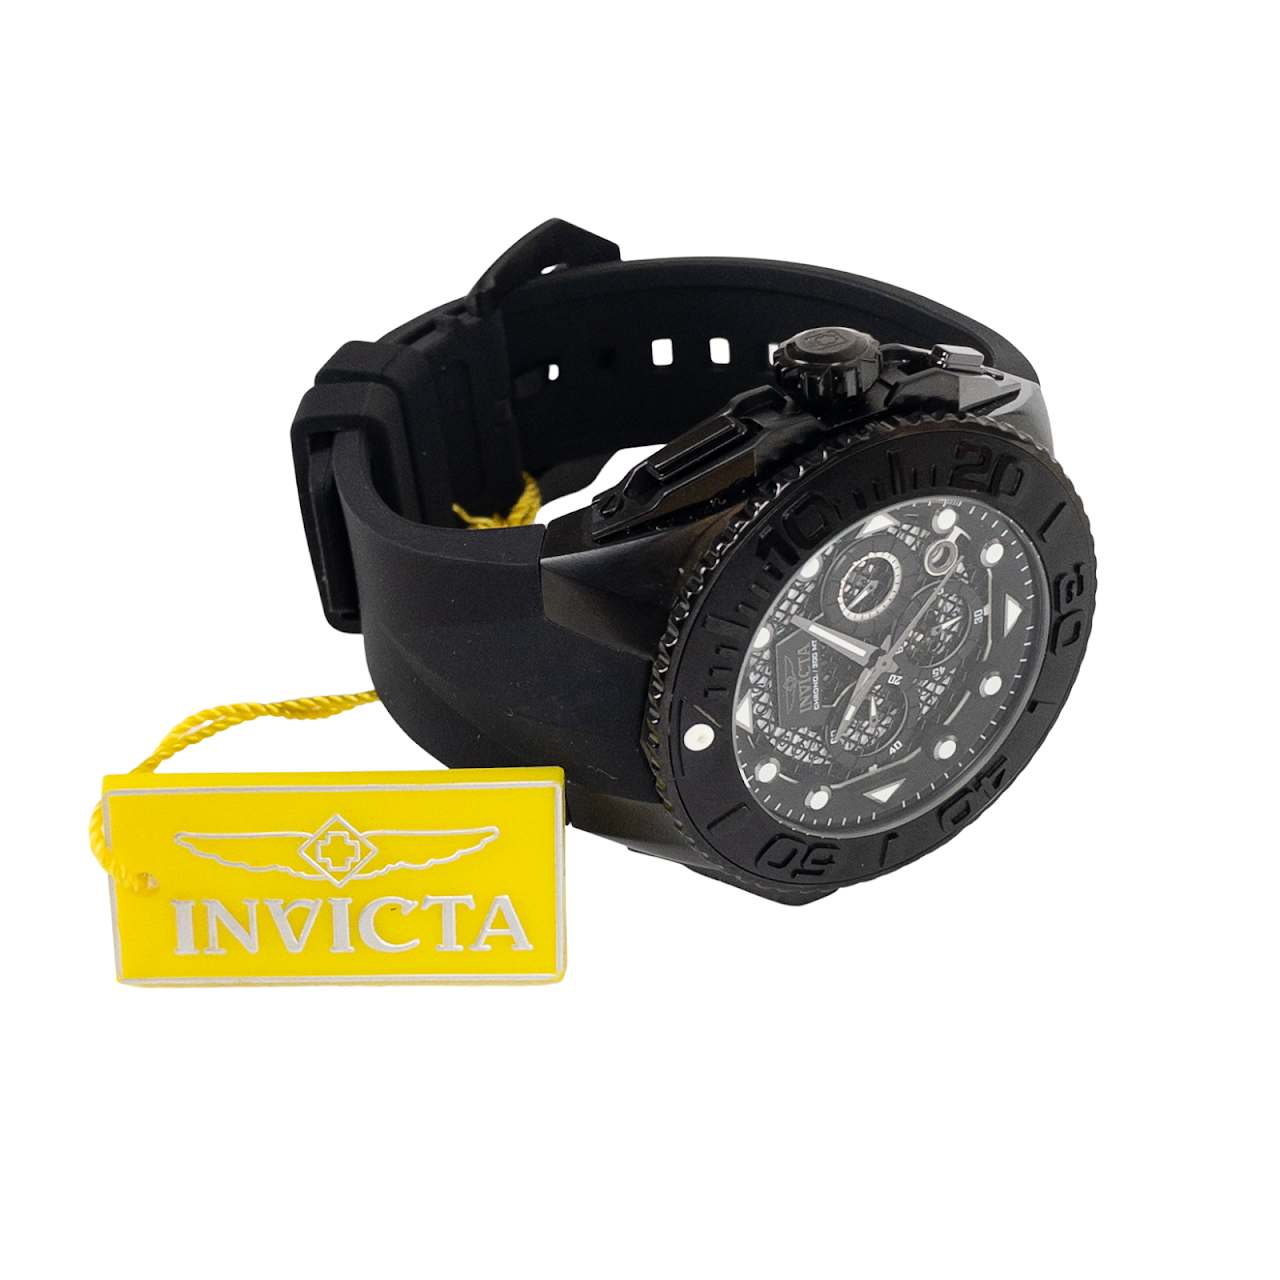 Invicta Coalition Forces Chronograph Wristwatch